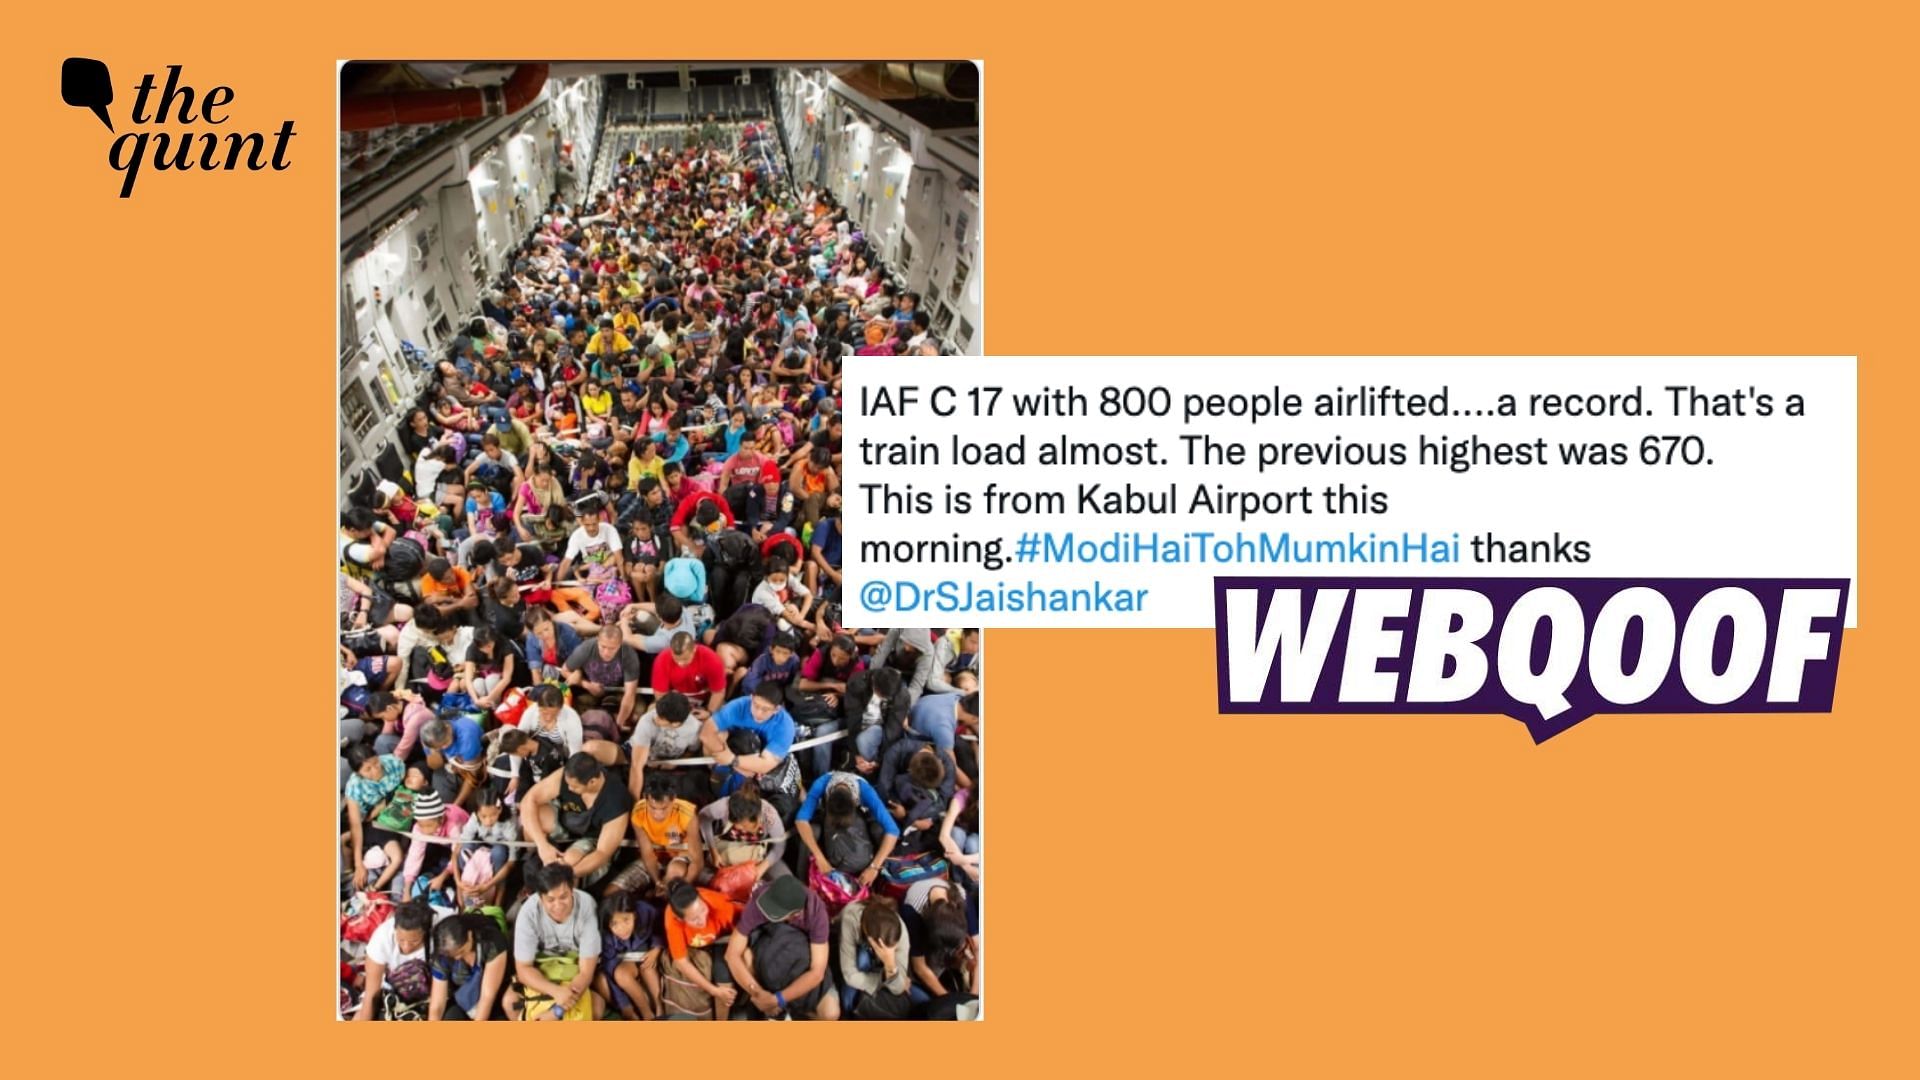 <div class="paragraphs"><p>The claim says that the Indian Air Force C-17 created a record by airlifting 800 people from Kabul, Afghanistan.</p></div>